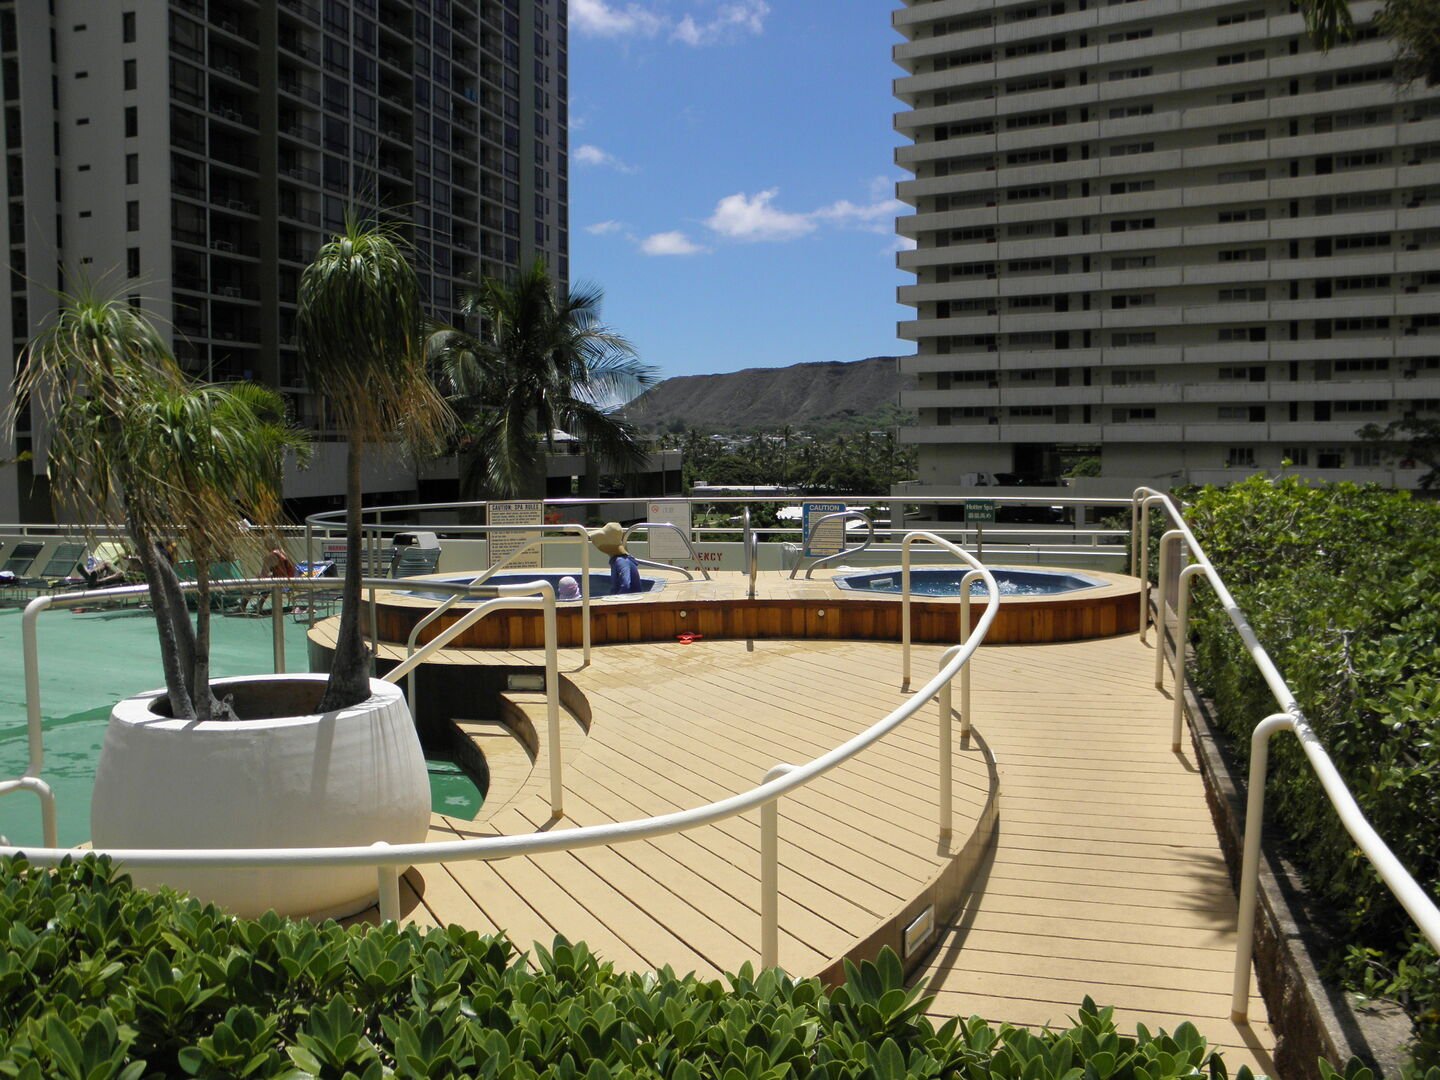 Two hot tubs on the recreation deck